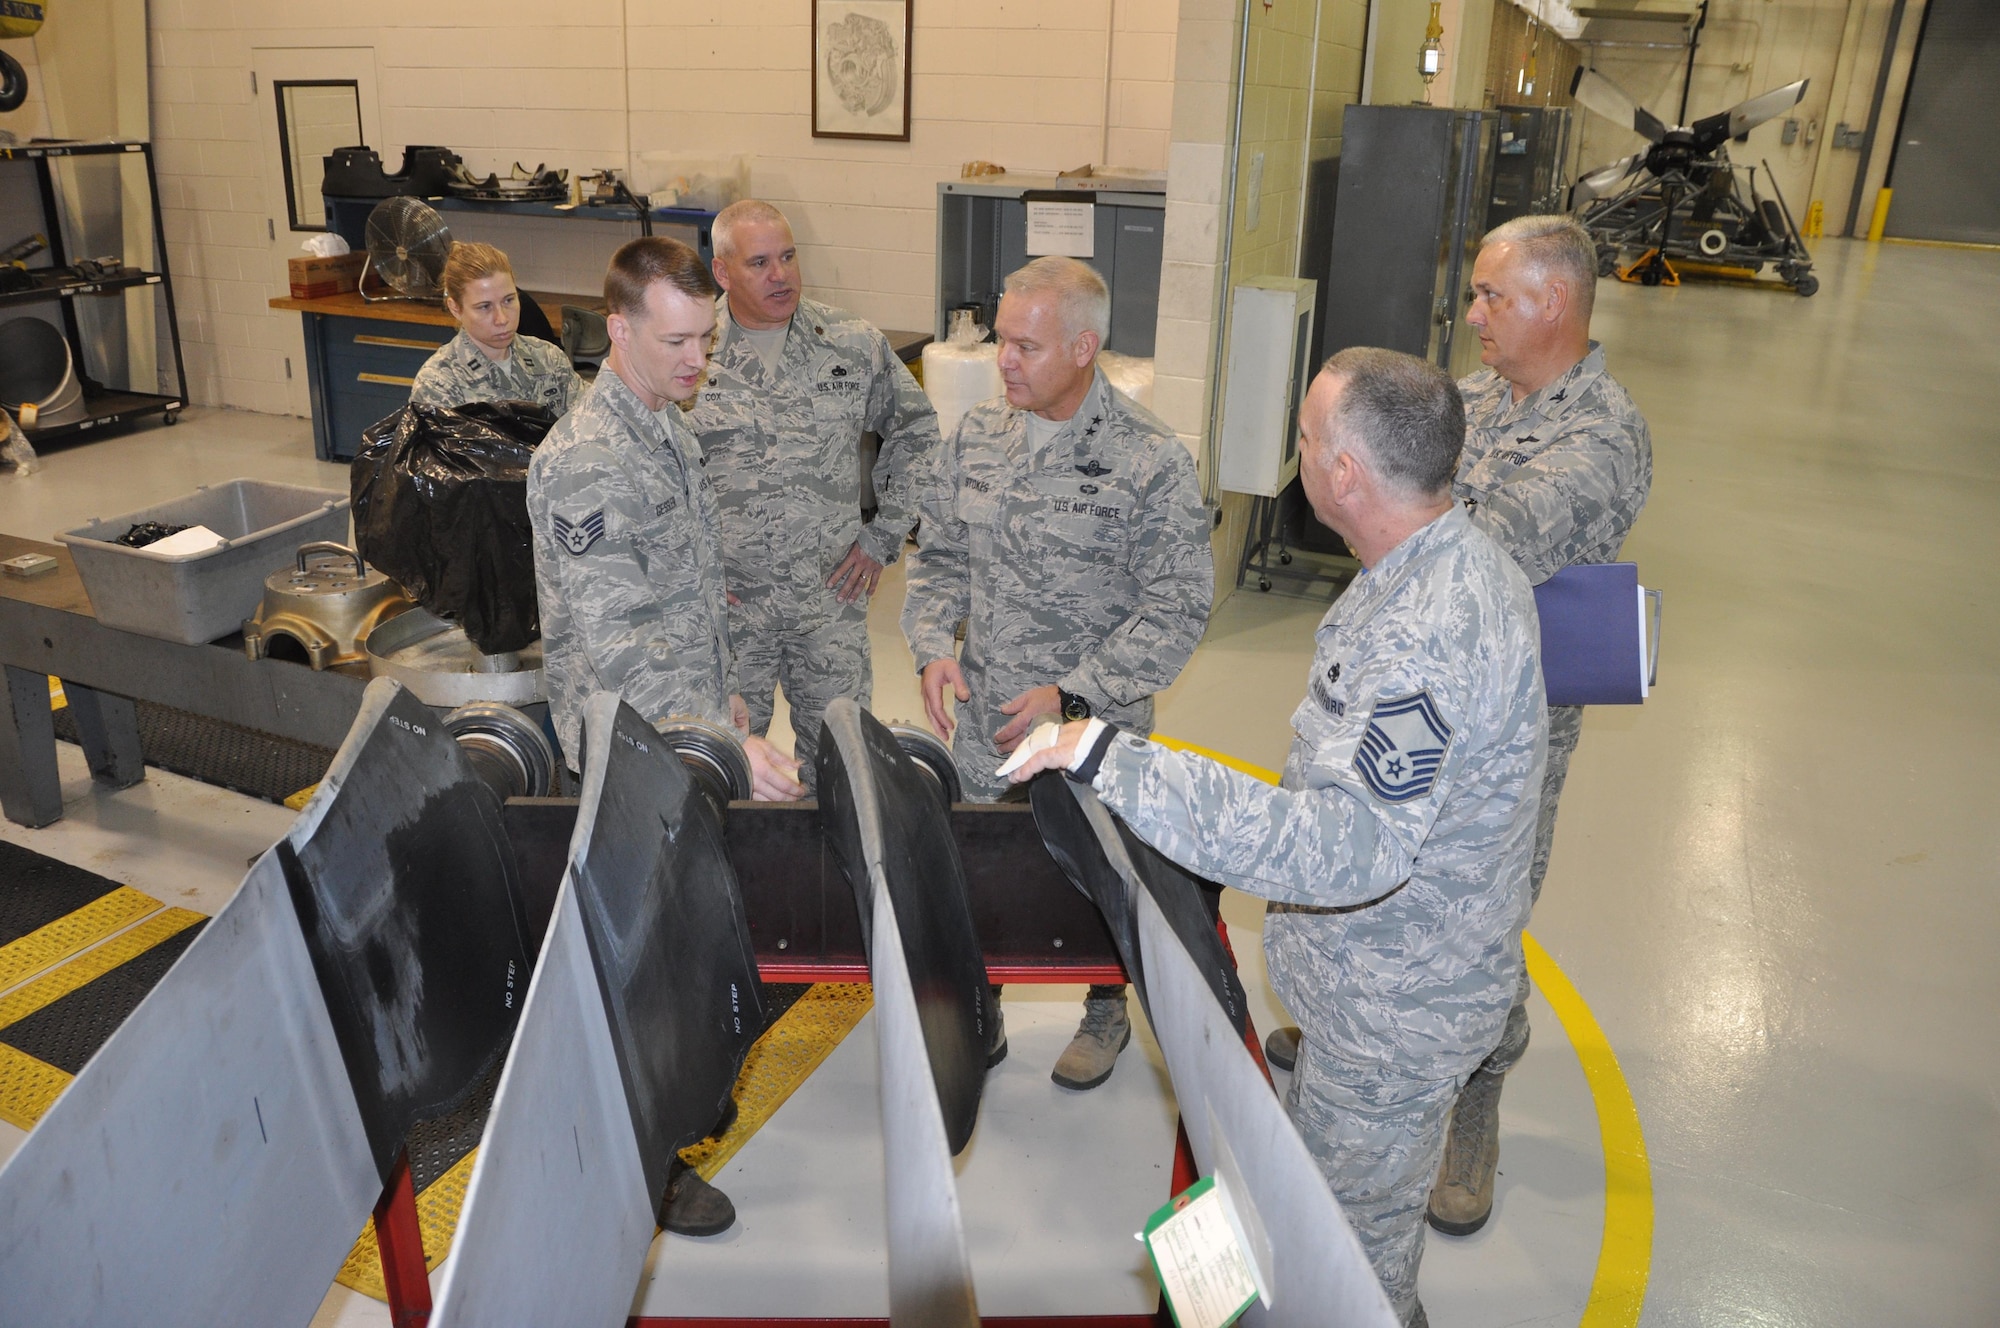 Commanding General of the 22nd Air Force, Maj. Gen. John Stokes, speaks with members of the 908th Maintenance Group during a visit to the 908th Airlift Wing Dec. 3 at Maxwell Air Force Base. Stokes and his wife, Sandy, came to spend time with his old unit during the December Unit Training Assembly. (U.S. Air Force photo by Bradley J. Clark)